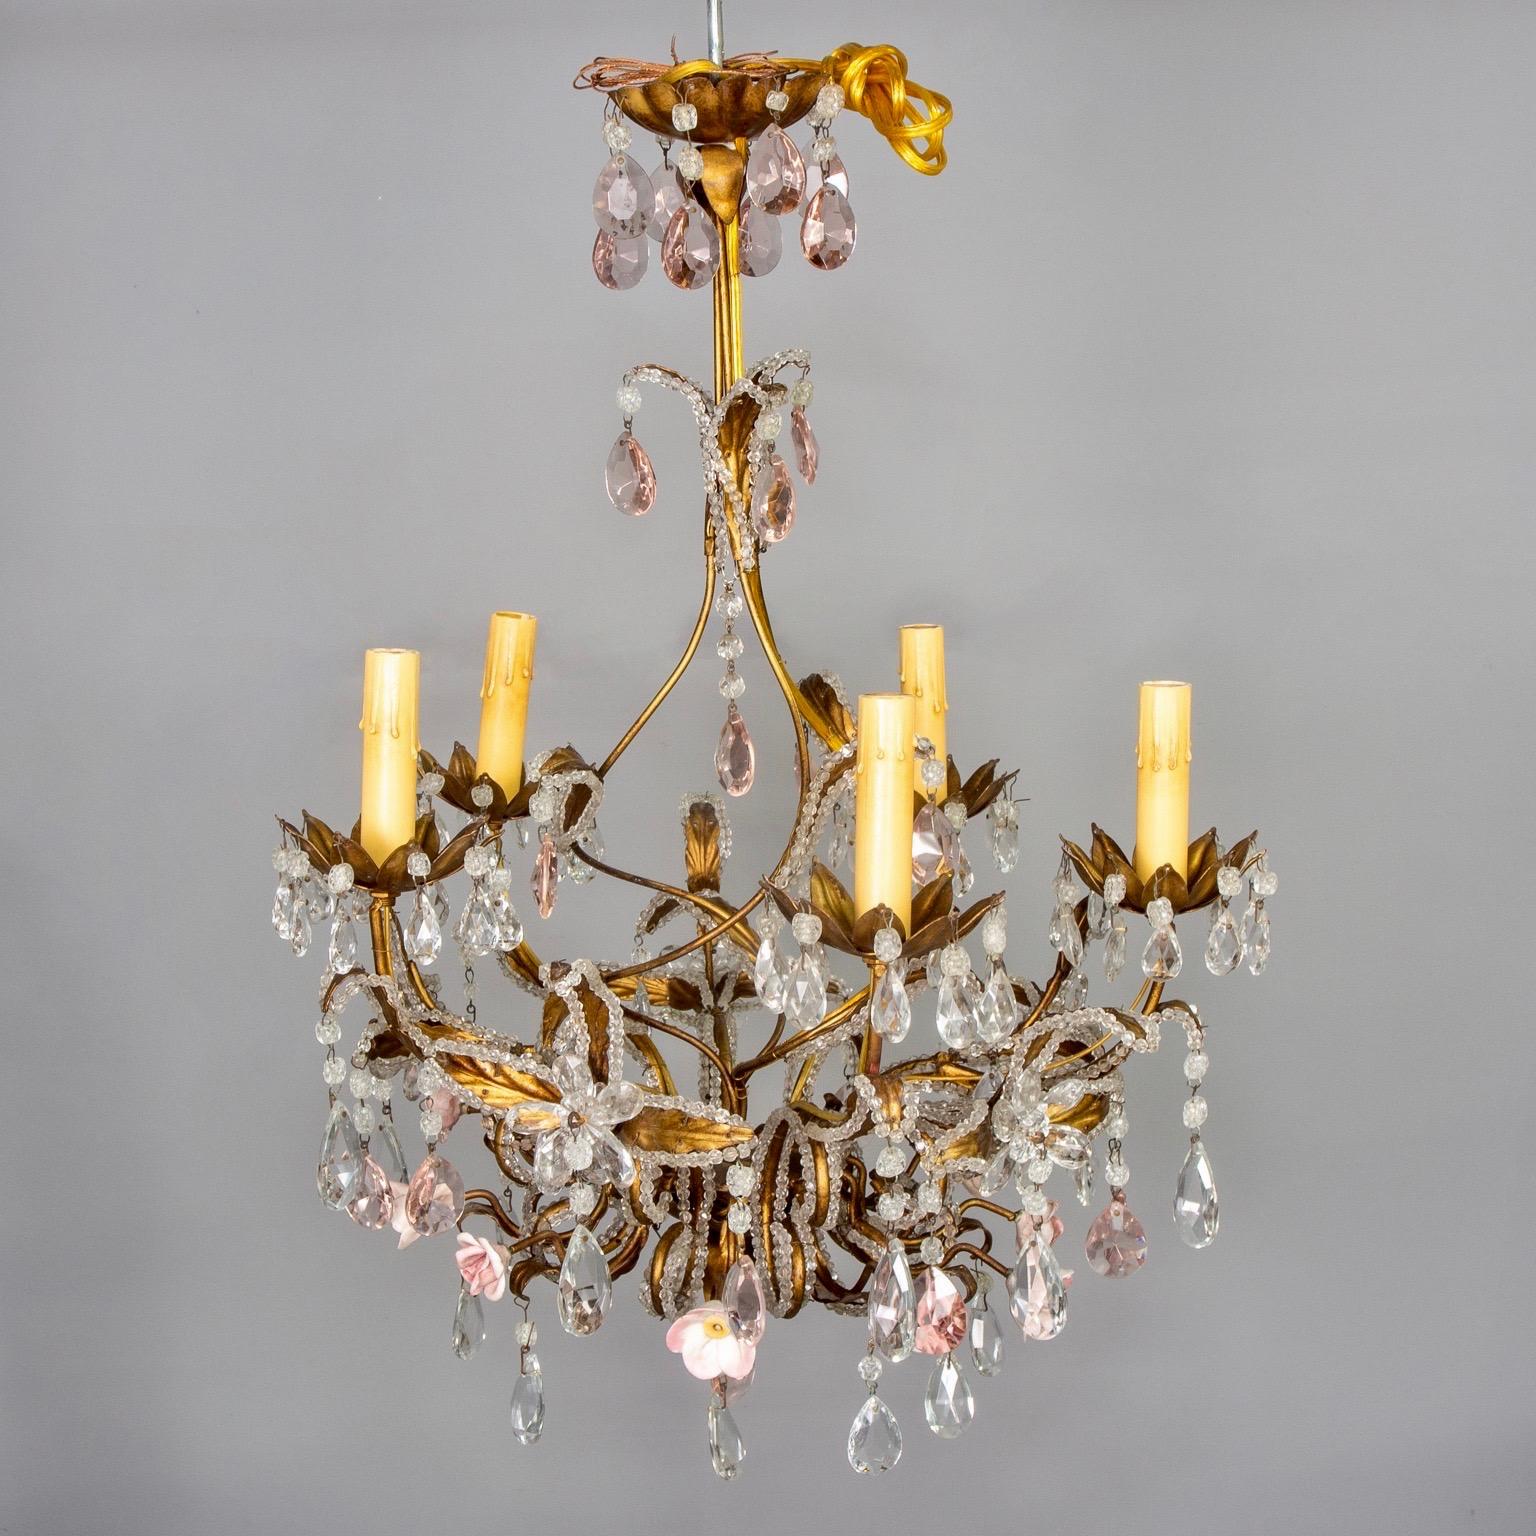 Five-light French gilt metal chandelier is embellished with clear and pink crystal drops, clear crystal flowers, extensive crystal beading and pale pink porcelain roses, circa 1930s. New wiring for US electrical standards. Candelabra sized sockets.